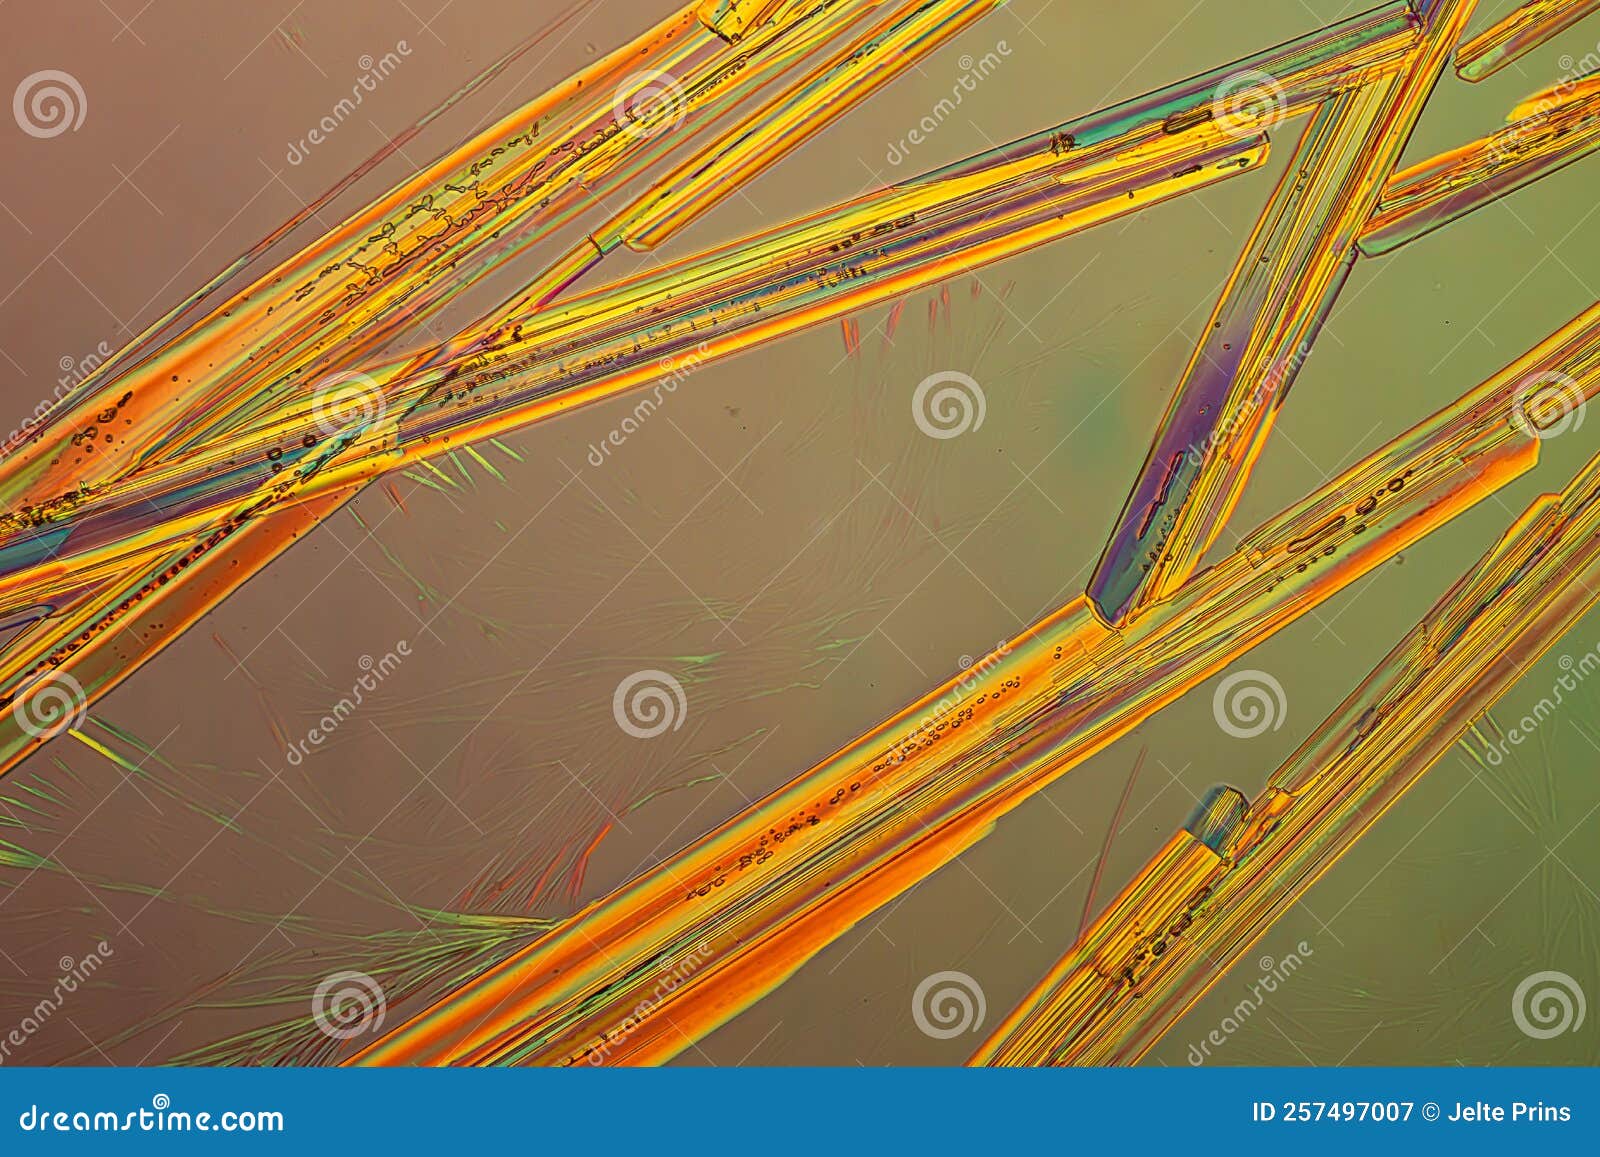 picture of the crystals of the chemical substance sodium platino cyanide made by a microscope in polarized light